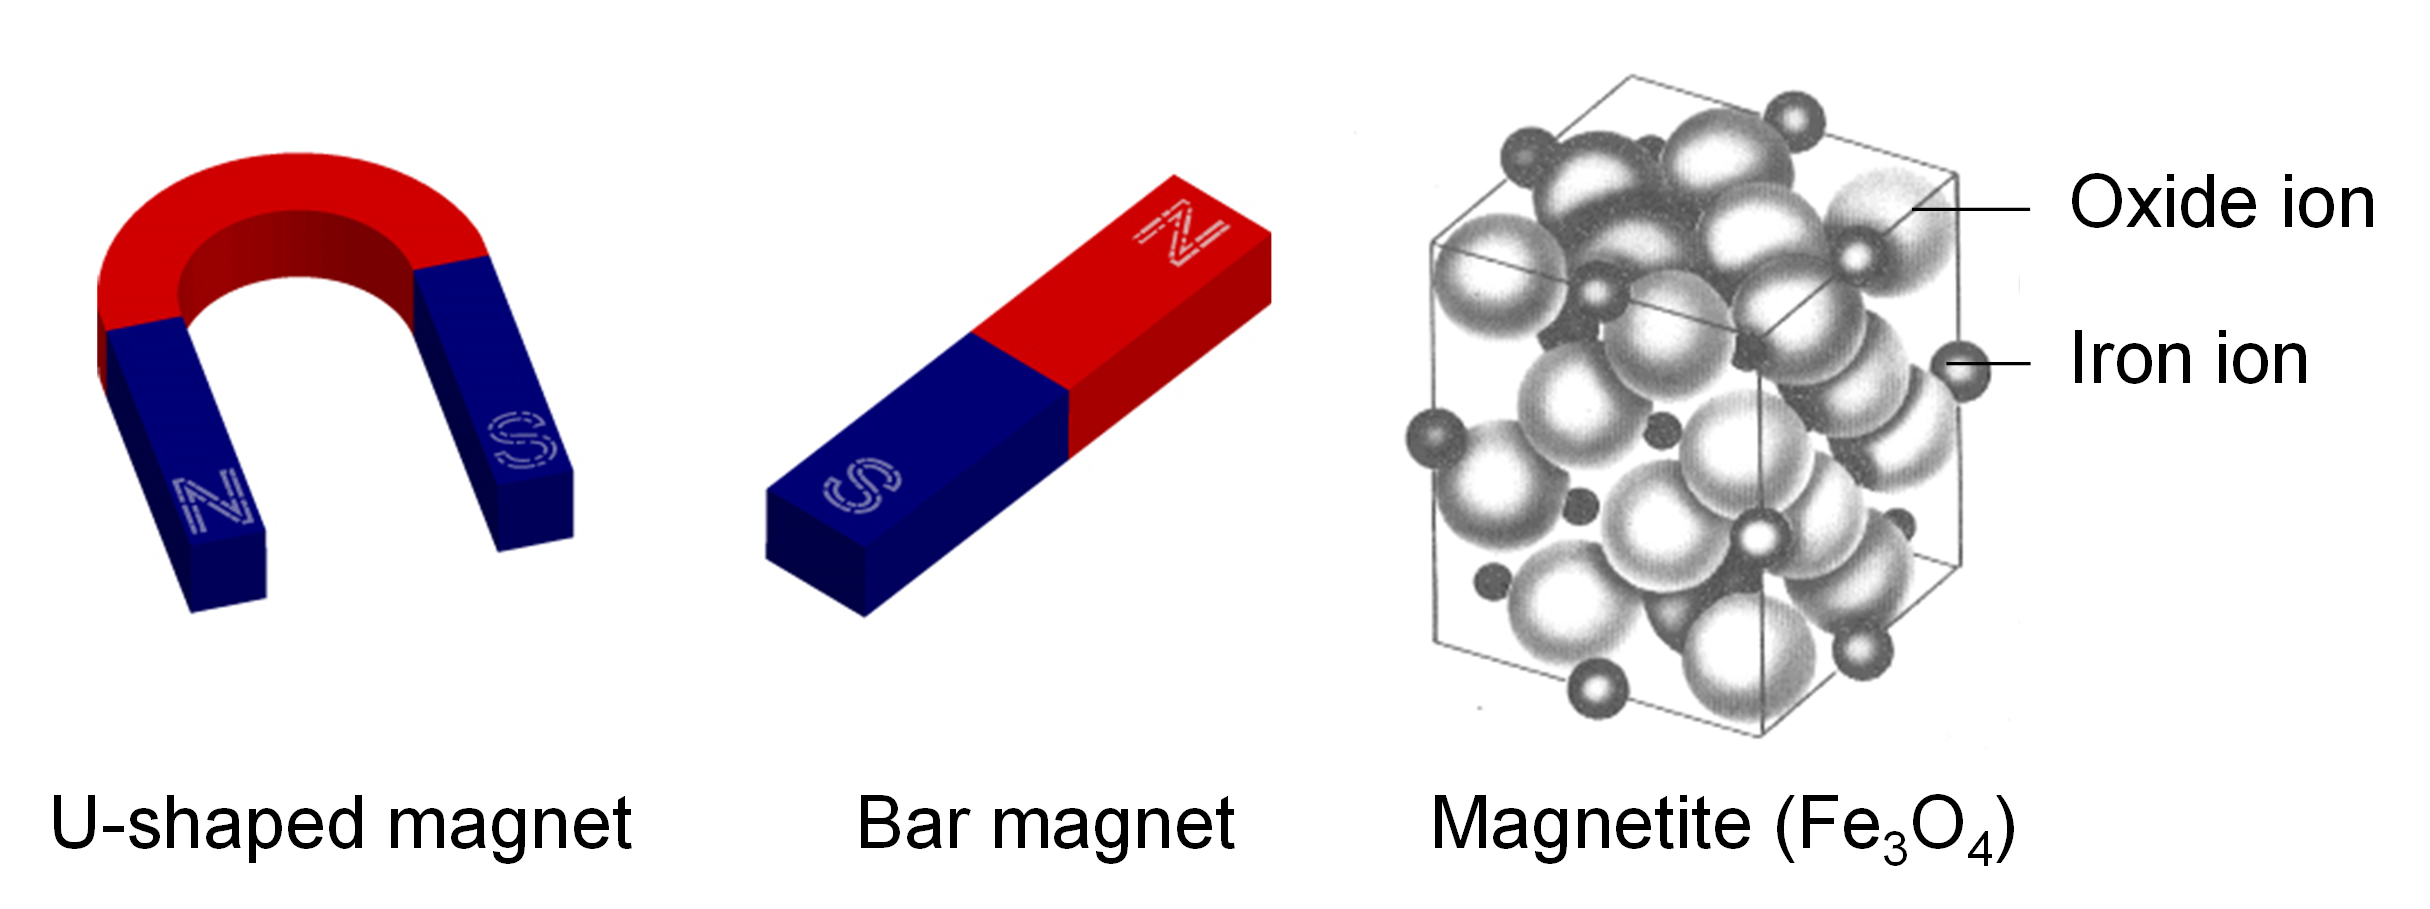 Strong magnetic field electric current resistant ideal rustproof ferrite bar magnet - School Science, the University of Tokyo